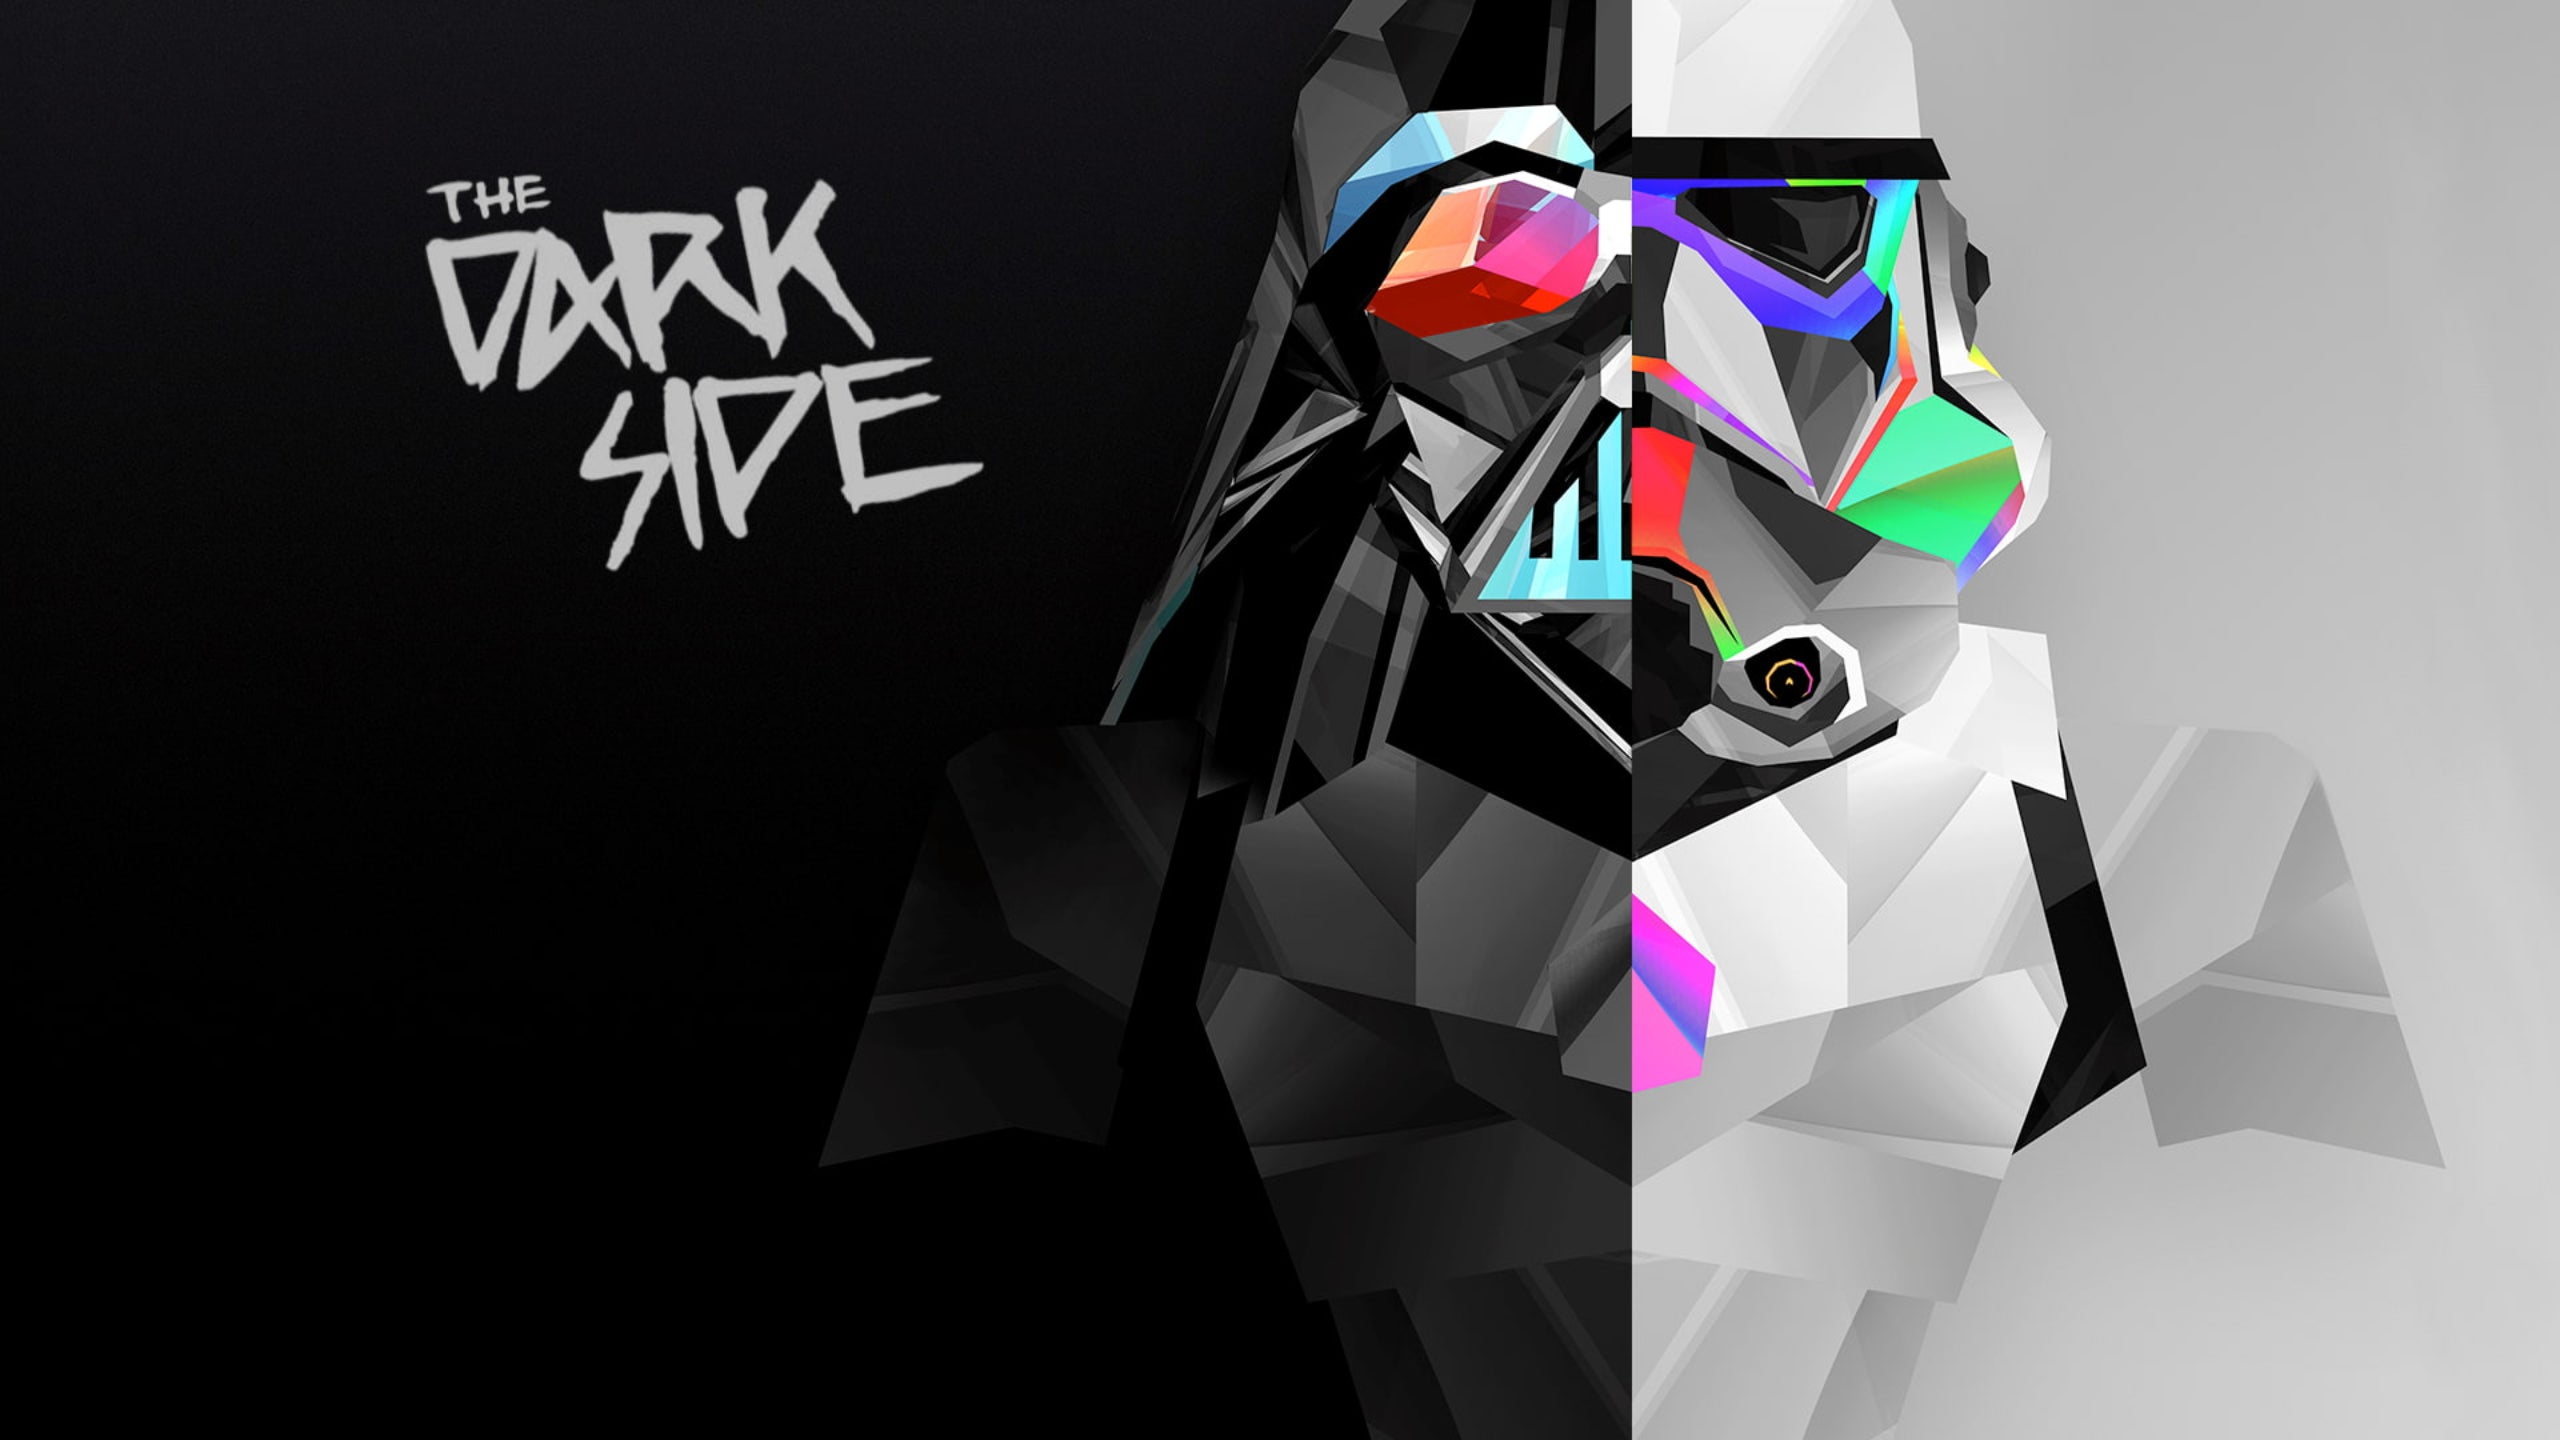 The dark side [2560x1440] : r/wallpapers